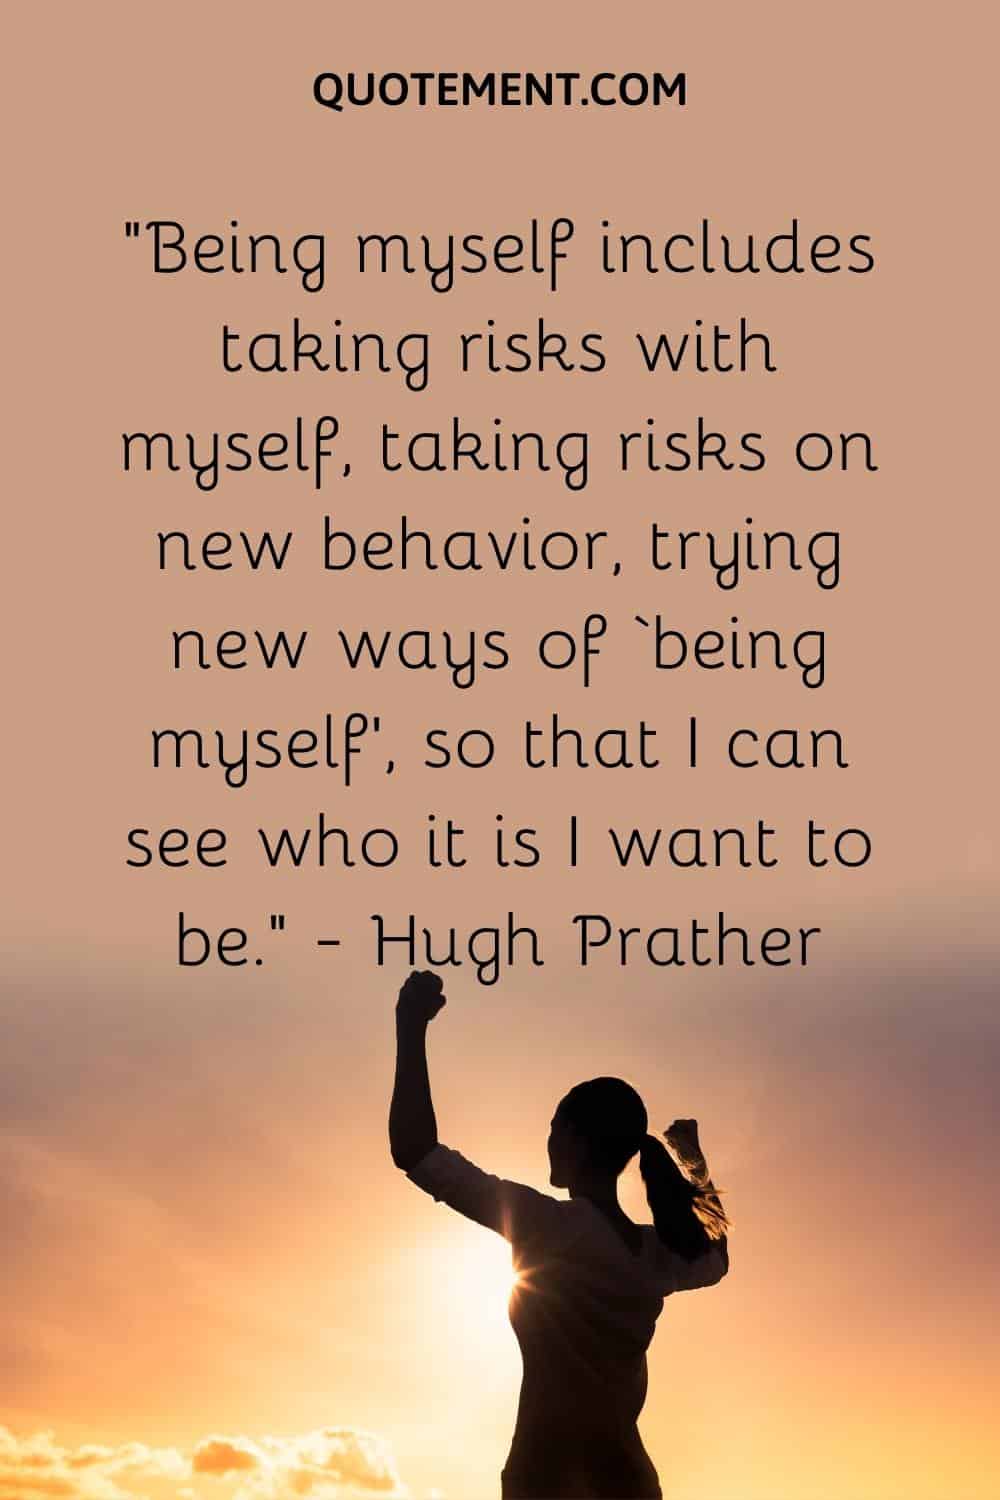 Being myself includes taking risks with myself